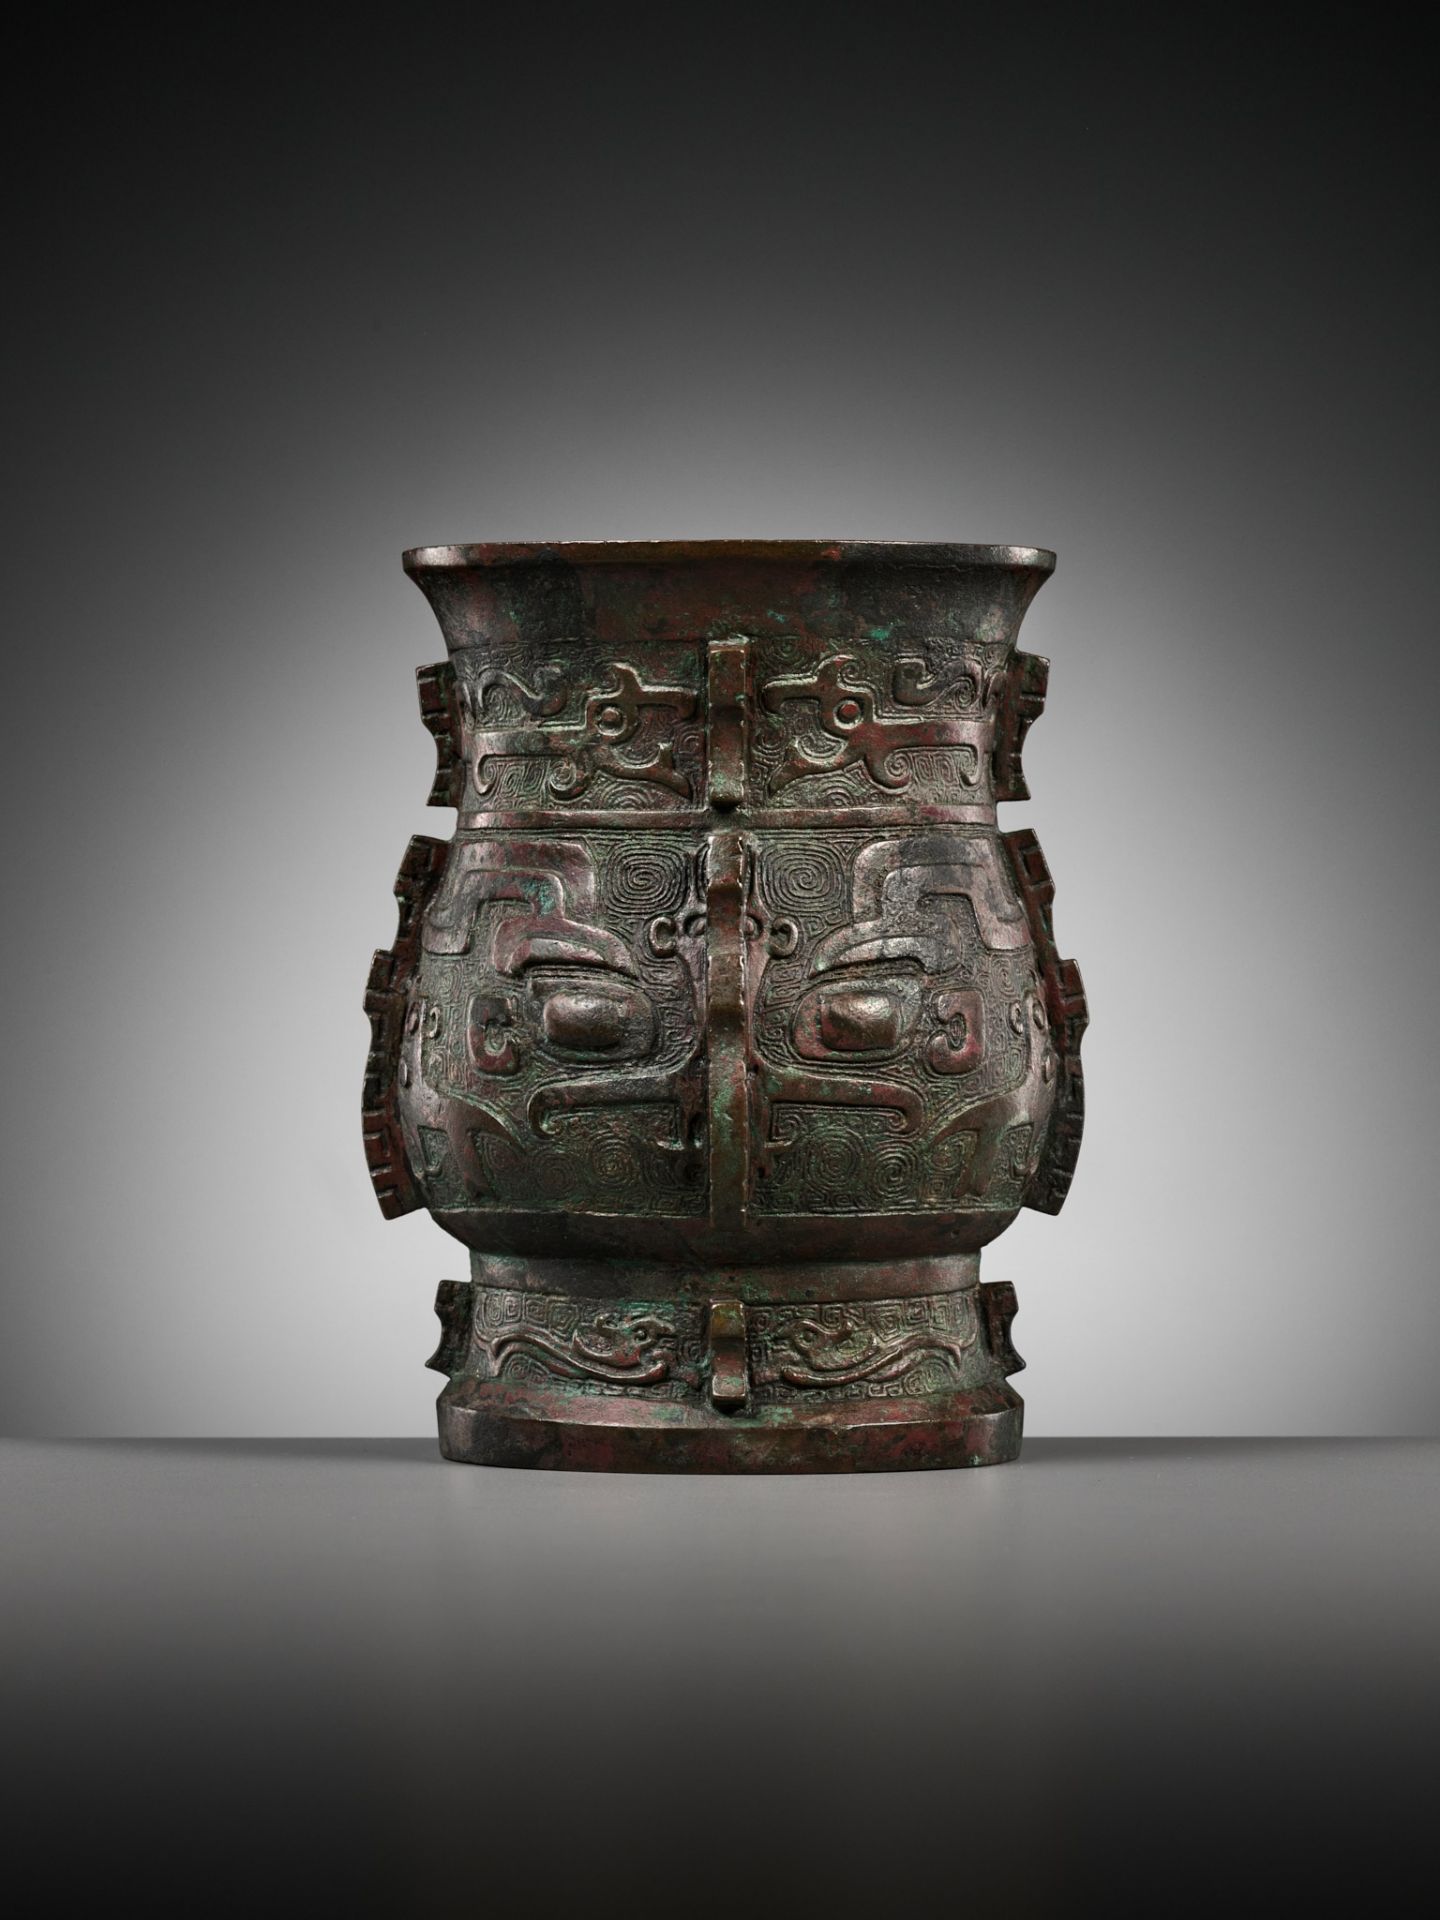 A RARE BRONZE RITUAL WINE VESSEL, ZHI, SHANG DYNASTY, CHINA, 13TH-12TH CENTURY BC - Image 13 of 25